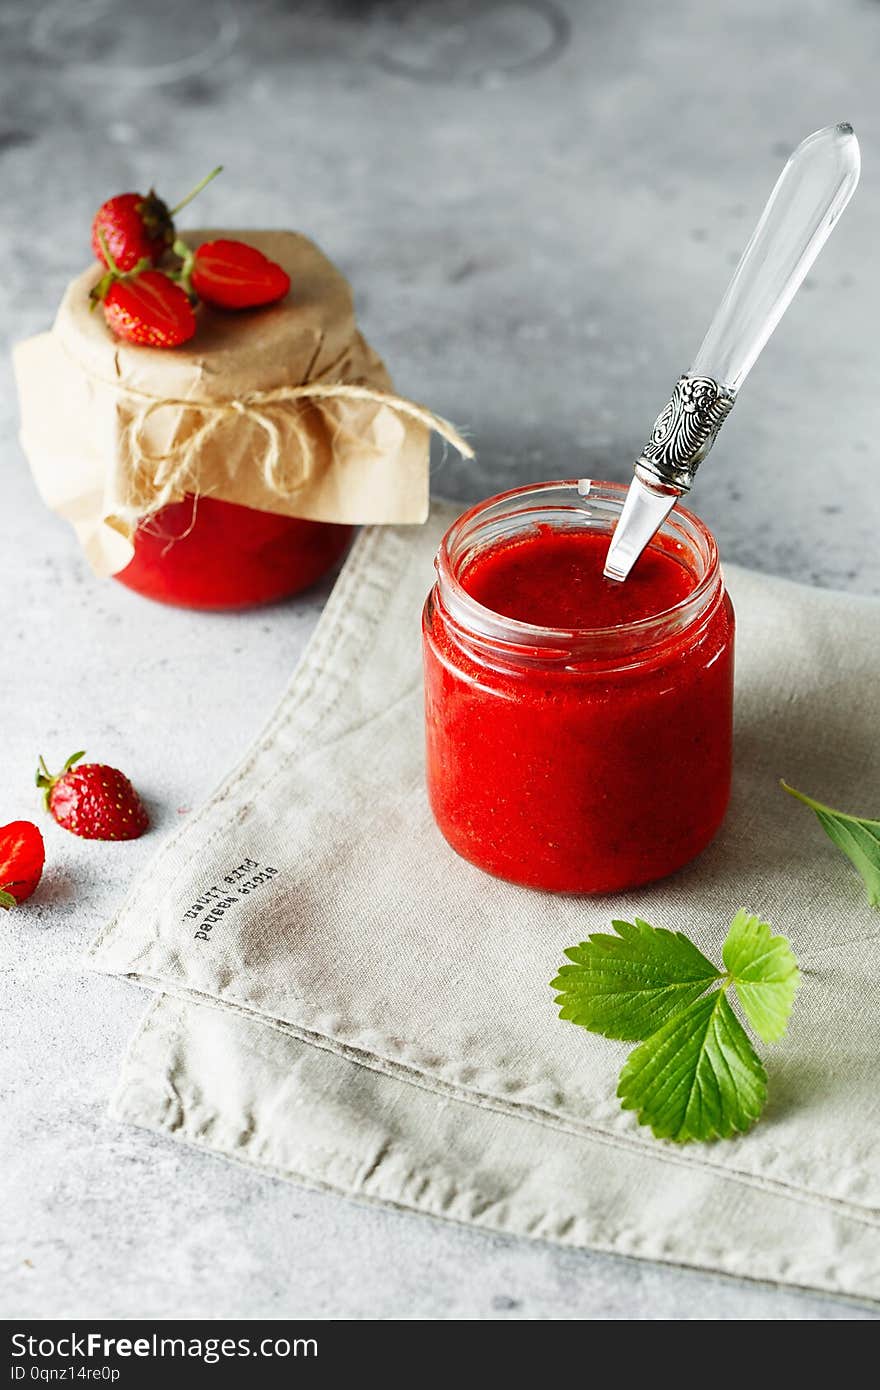 Homemade strawberry jam in glass jar on the wooden box on the gray background. Wild strawberry jam in swing-top jar on wood with strawberries in the back. Food photography. Seasonal cooking concept